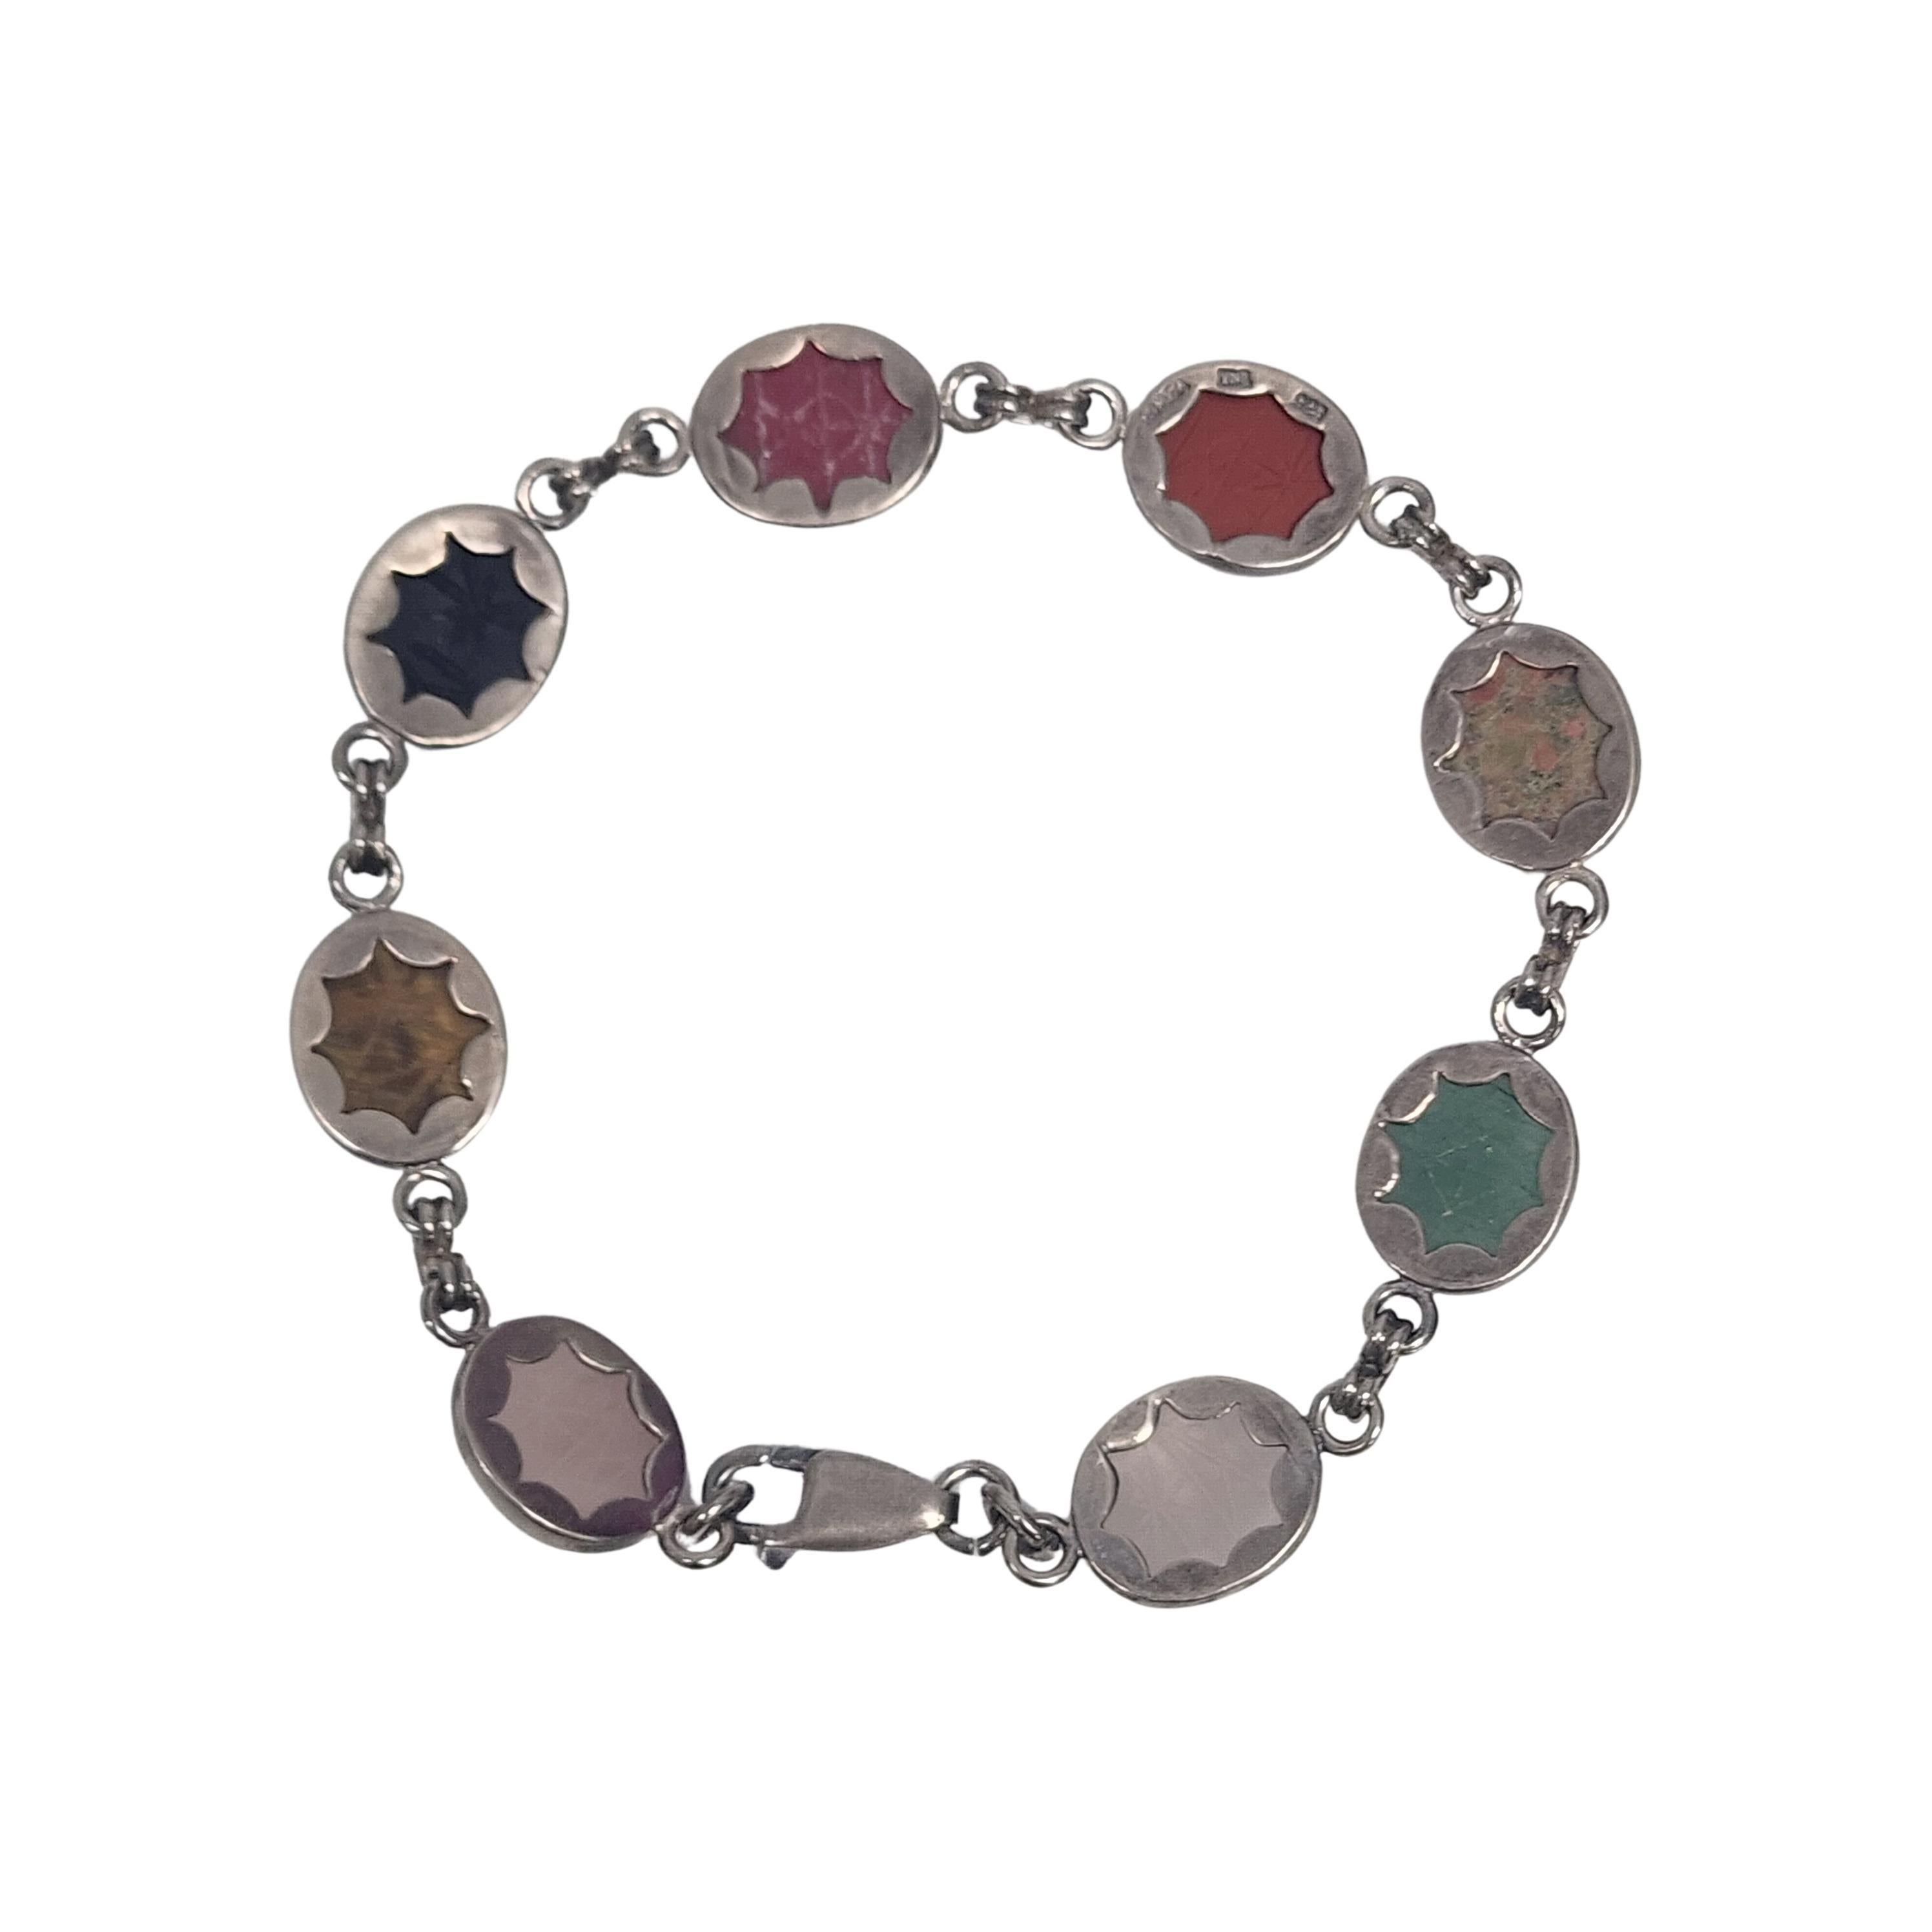 Sterling silver and multi-stone scareb bracelet.

Etched oval cabochon stones bezel set in sterling silver. Some of the stones appear to be rose quartz, tiger's eye, onyx, carnelian and jade.

Weighs approx 17.0g, 11.0dwt.

Measures approx 7 3/4